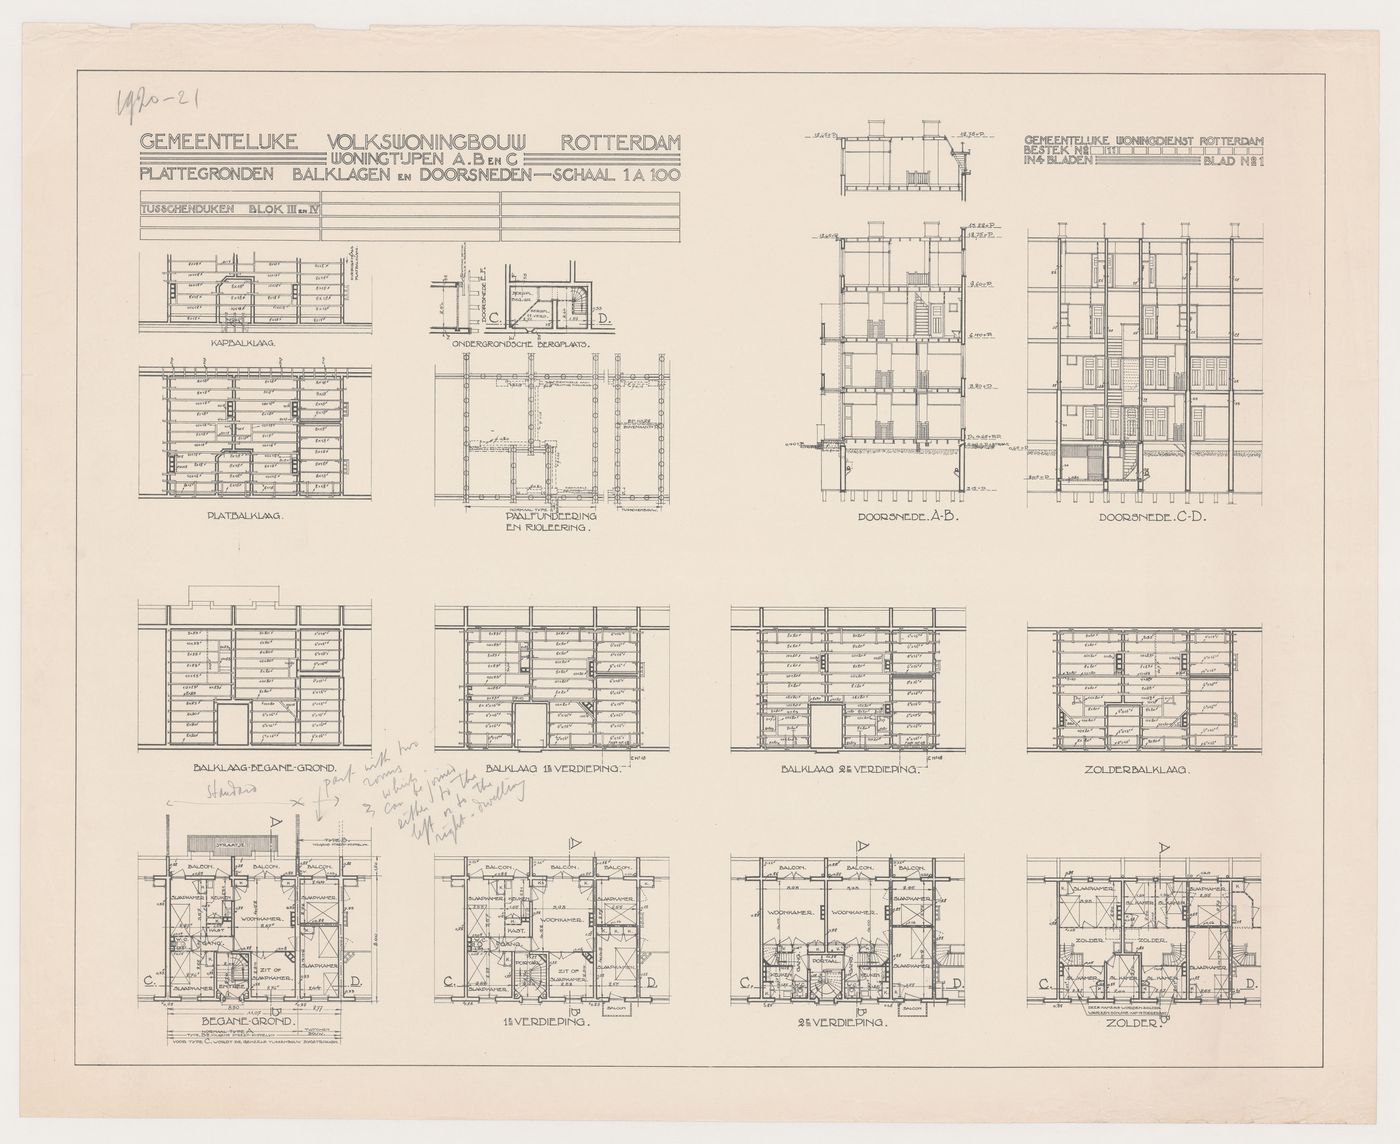 Floor, framing and piling plans and sections for Blocks 3 and 4, Tusschendijken Housing Estate, Rotterdam, Netherlands